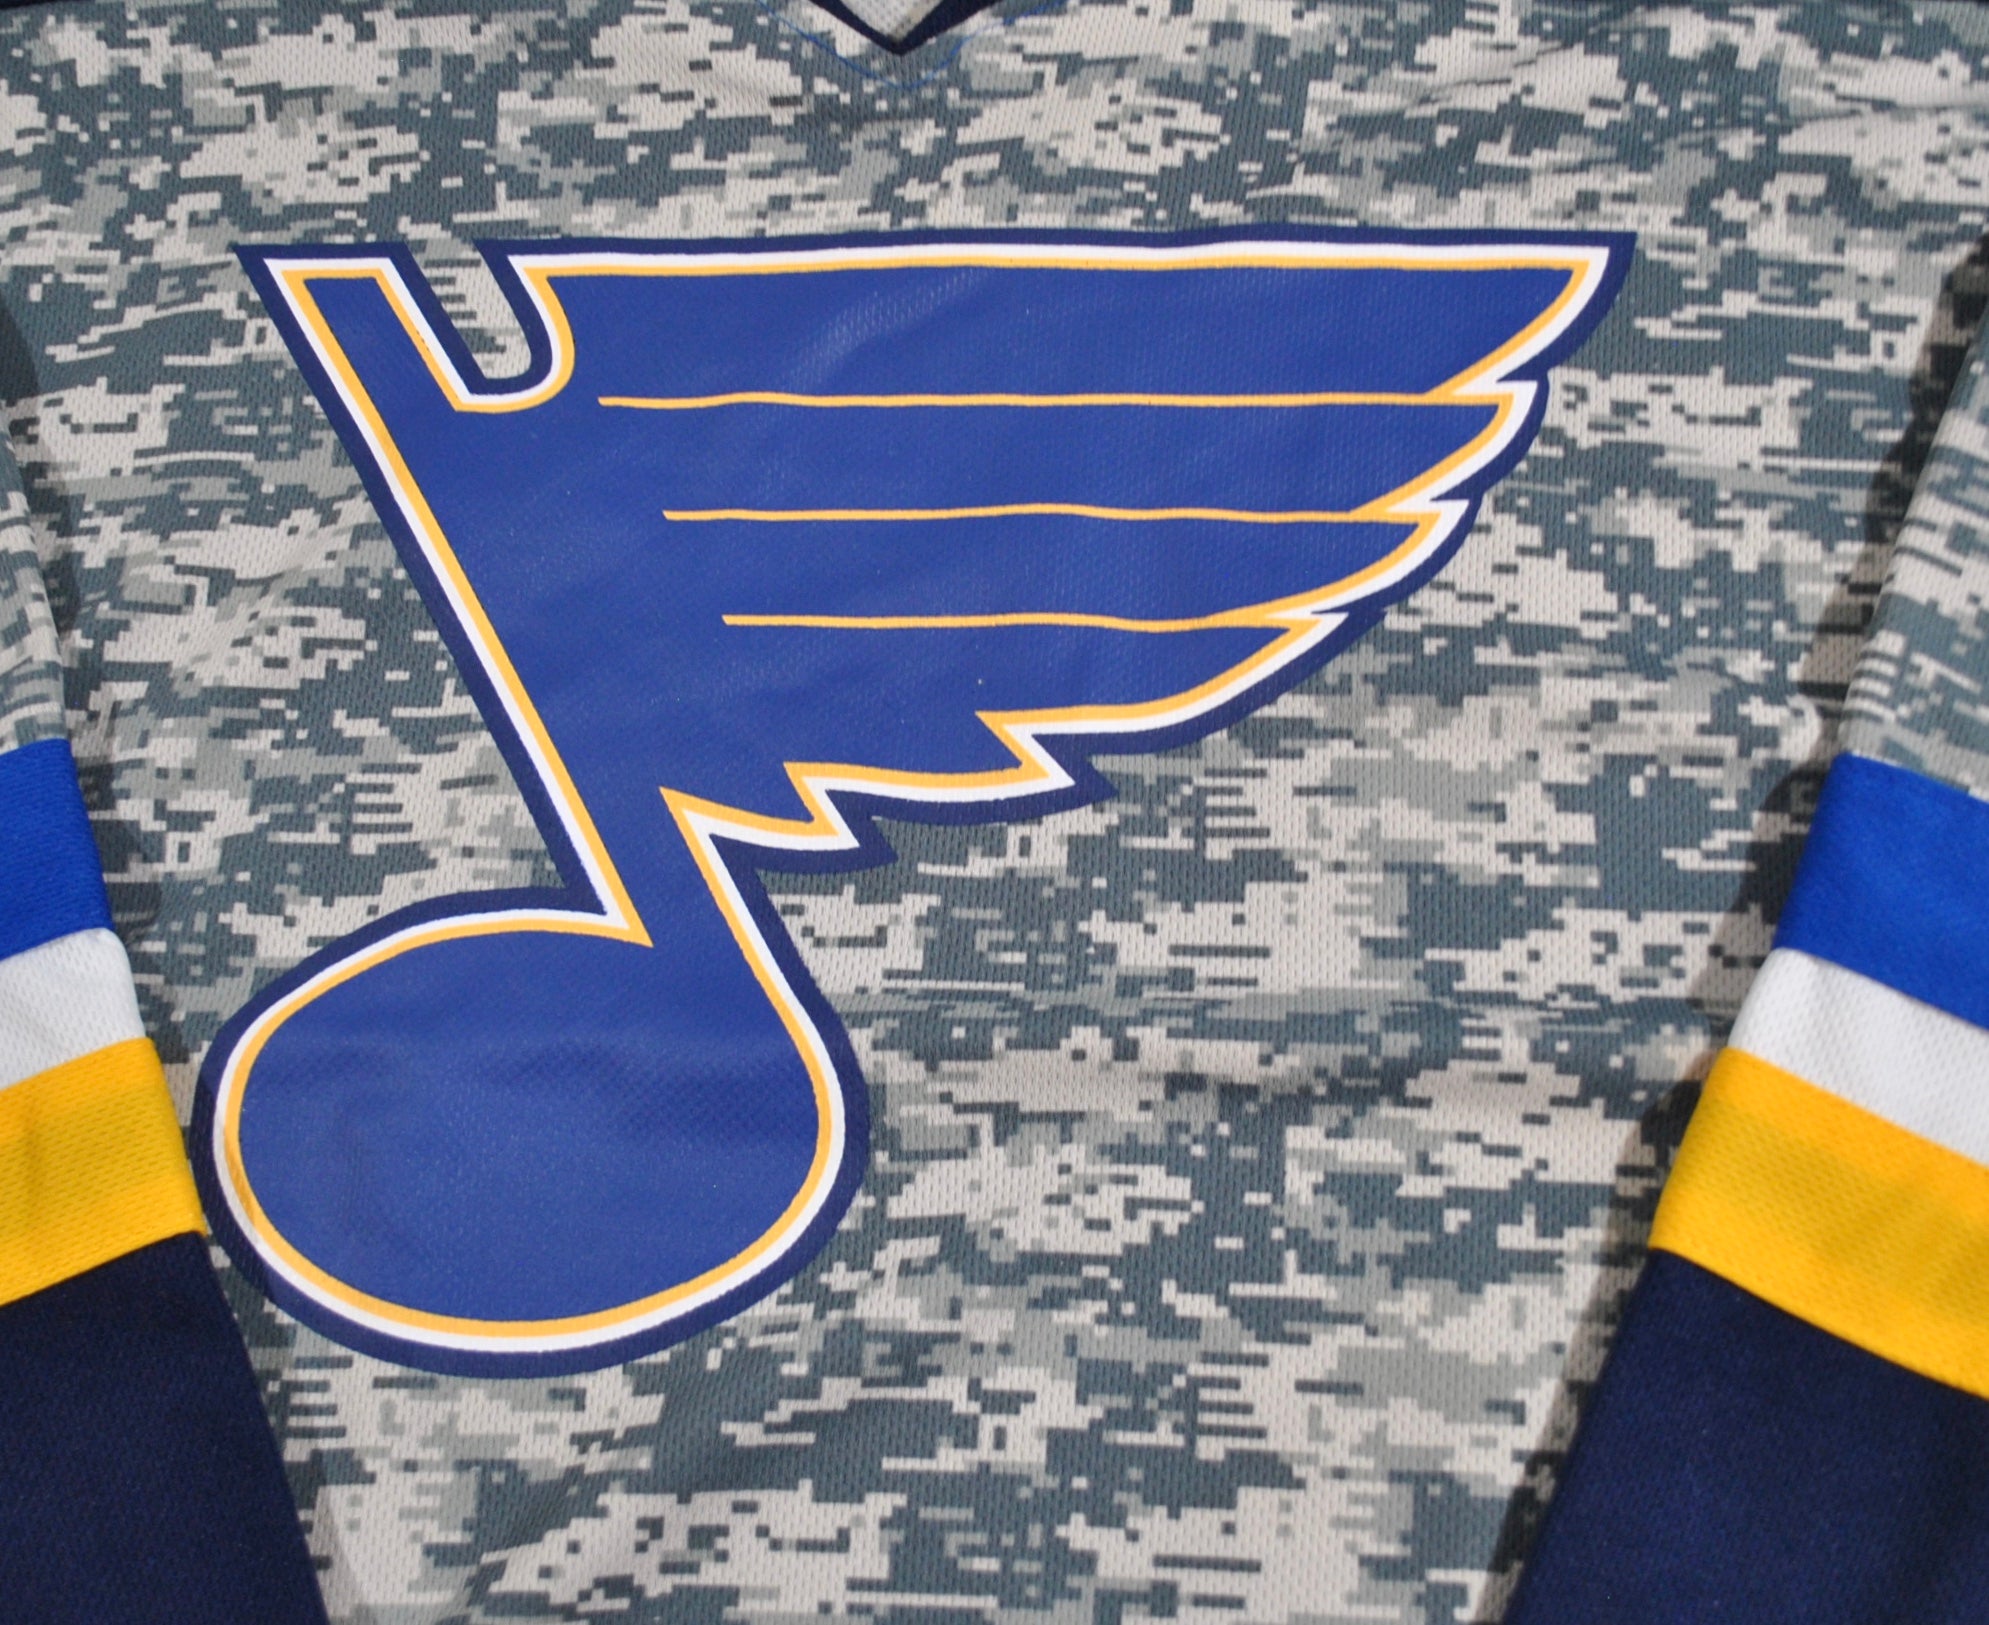 St. Louis Blues Jersey Size X-Large – Yesterday's Attic